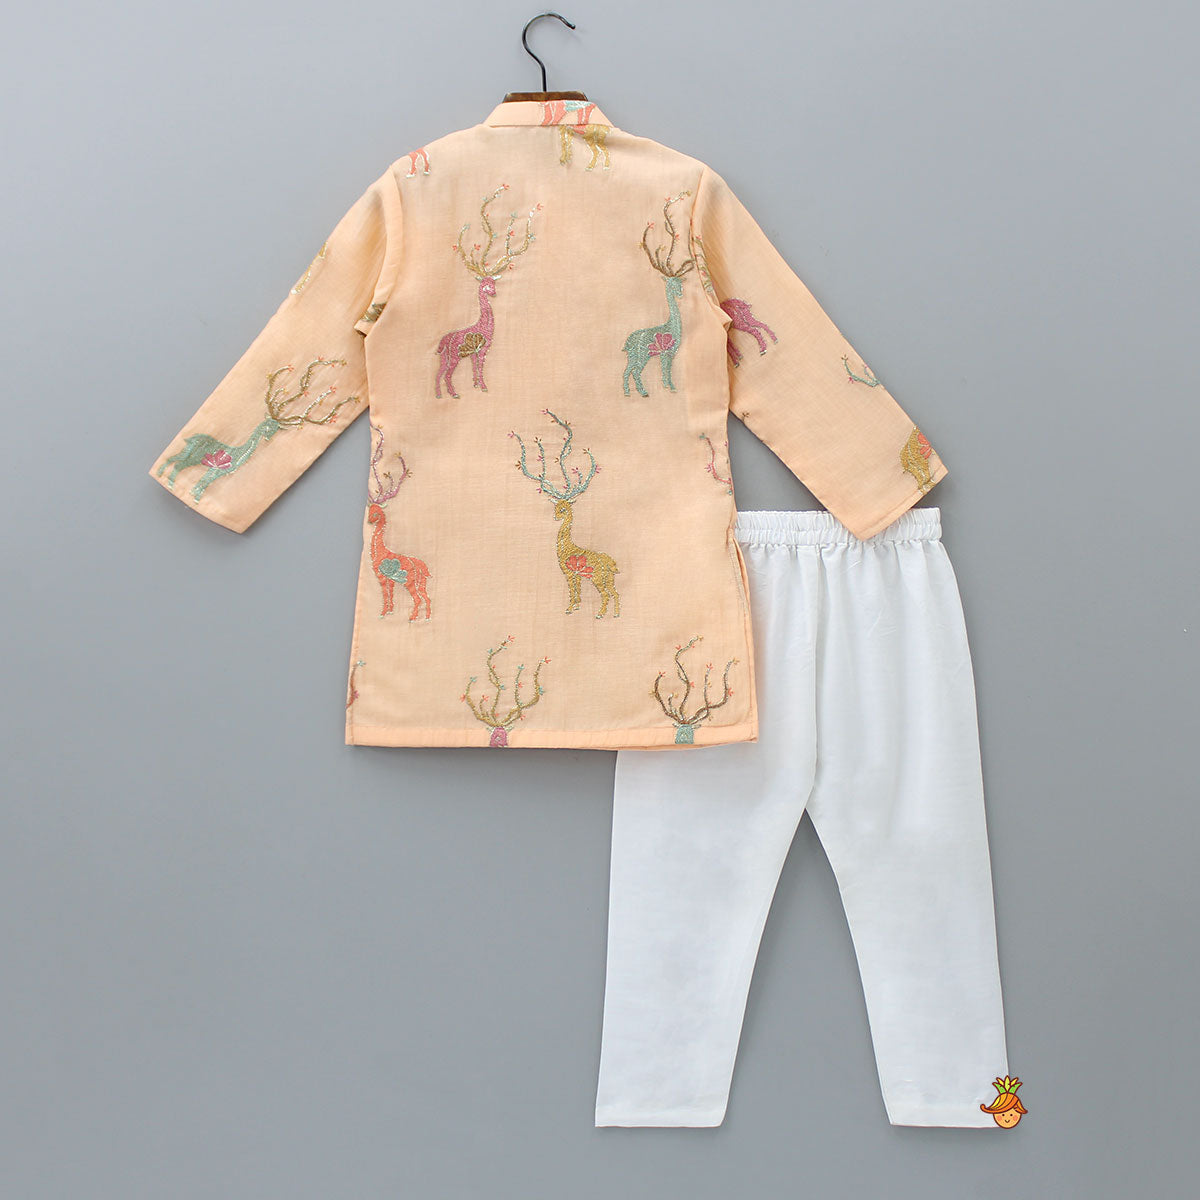 Pre Order: Patch Pocket Detail Embroidered Peach Kurta And Off White Pyjama